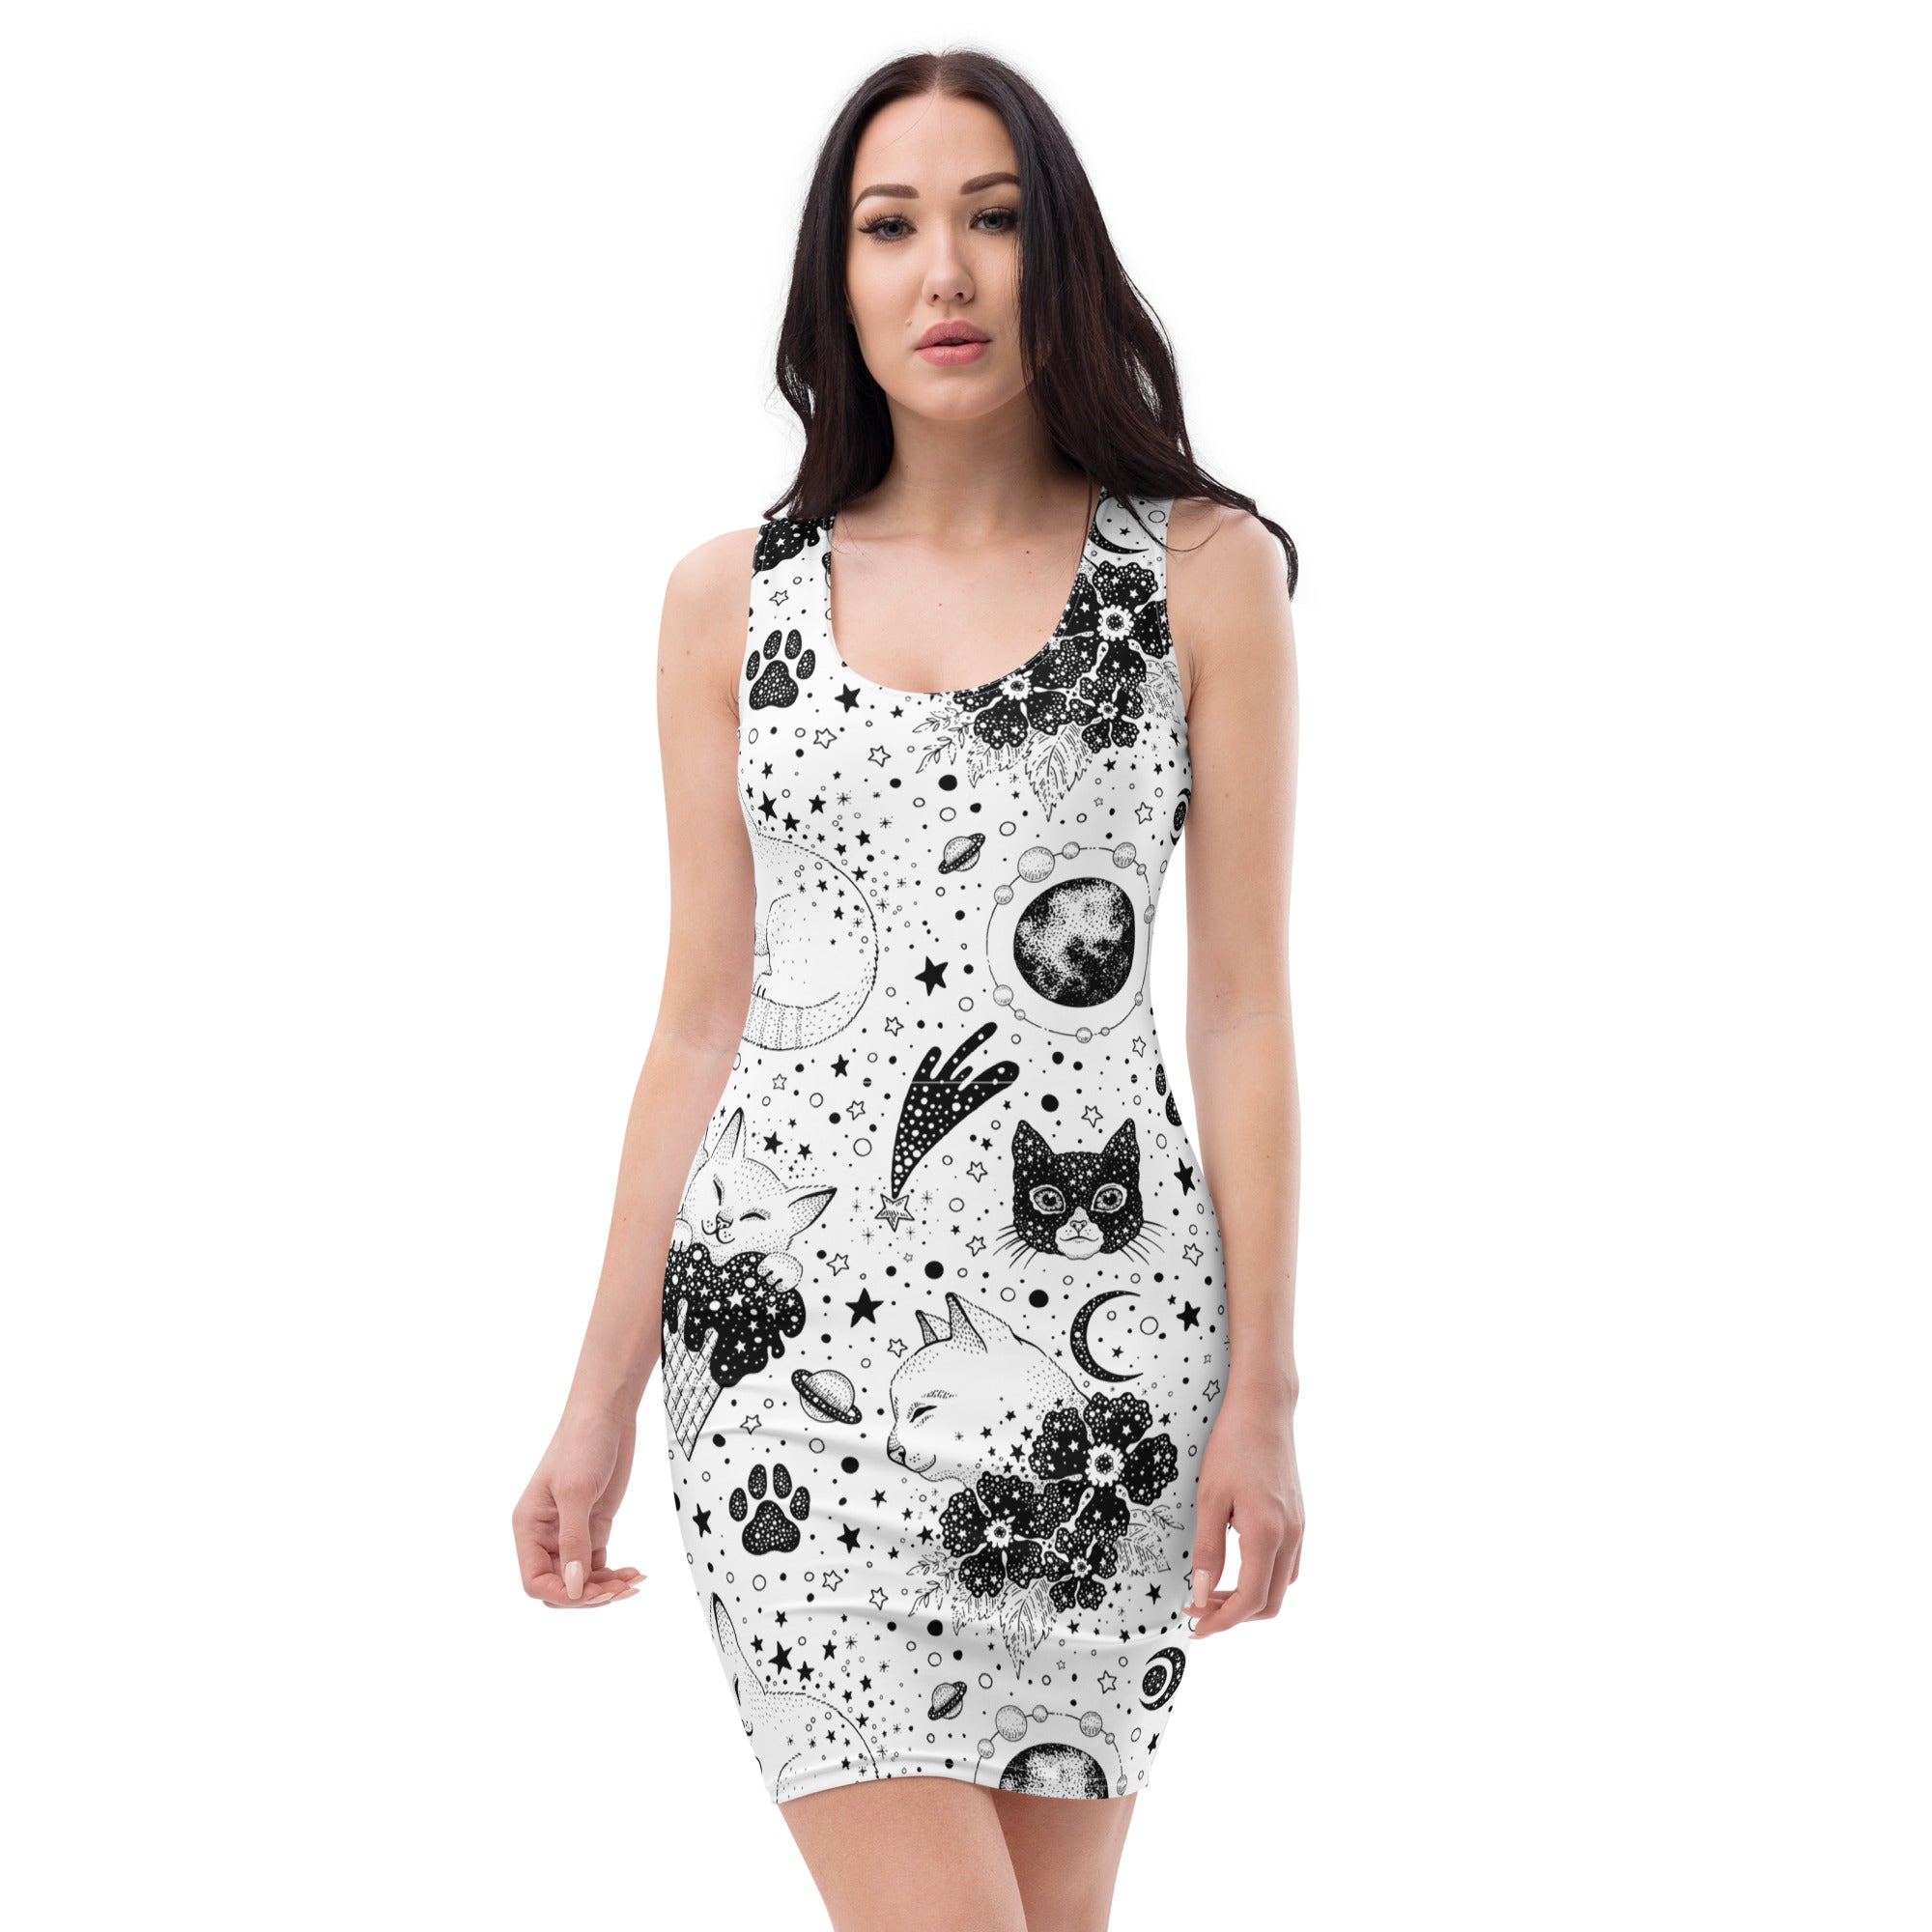 "Galactic Feline Frenzy: Women’s Space Cats Fun Fitted Dress", lioness-love